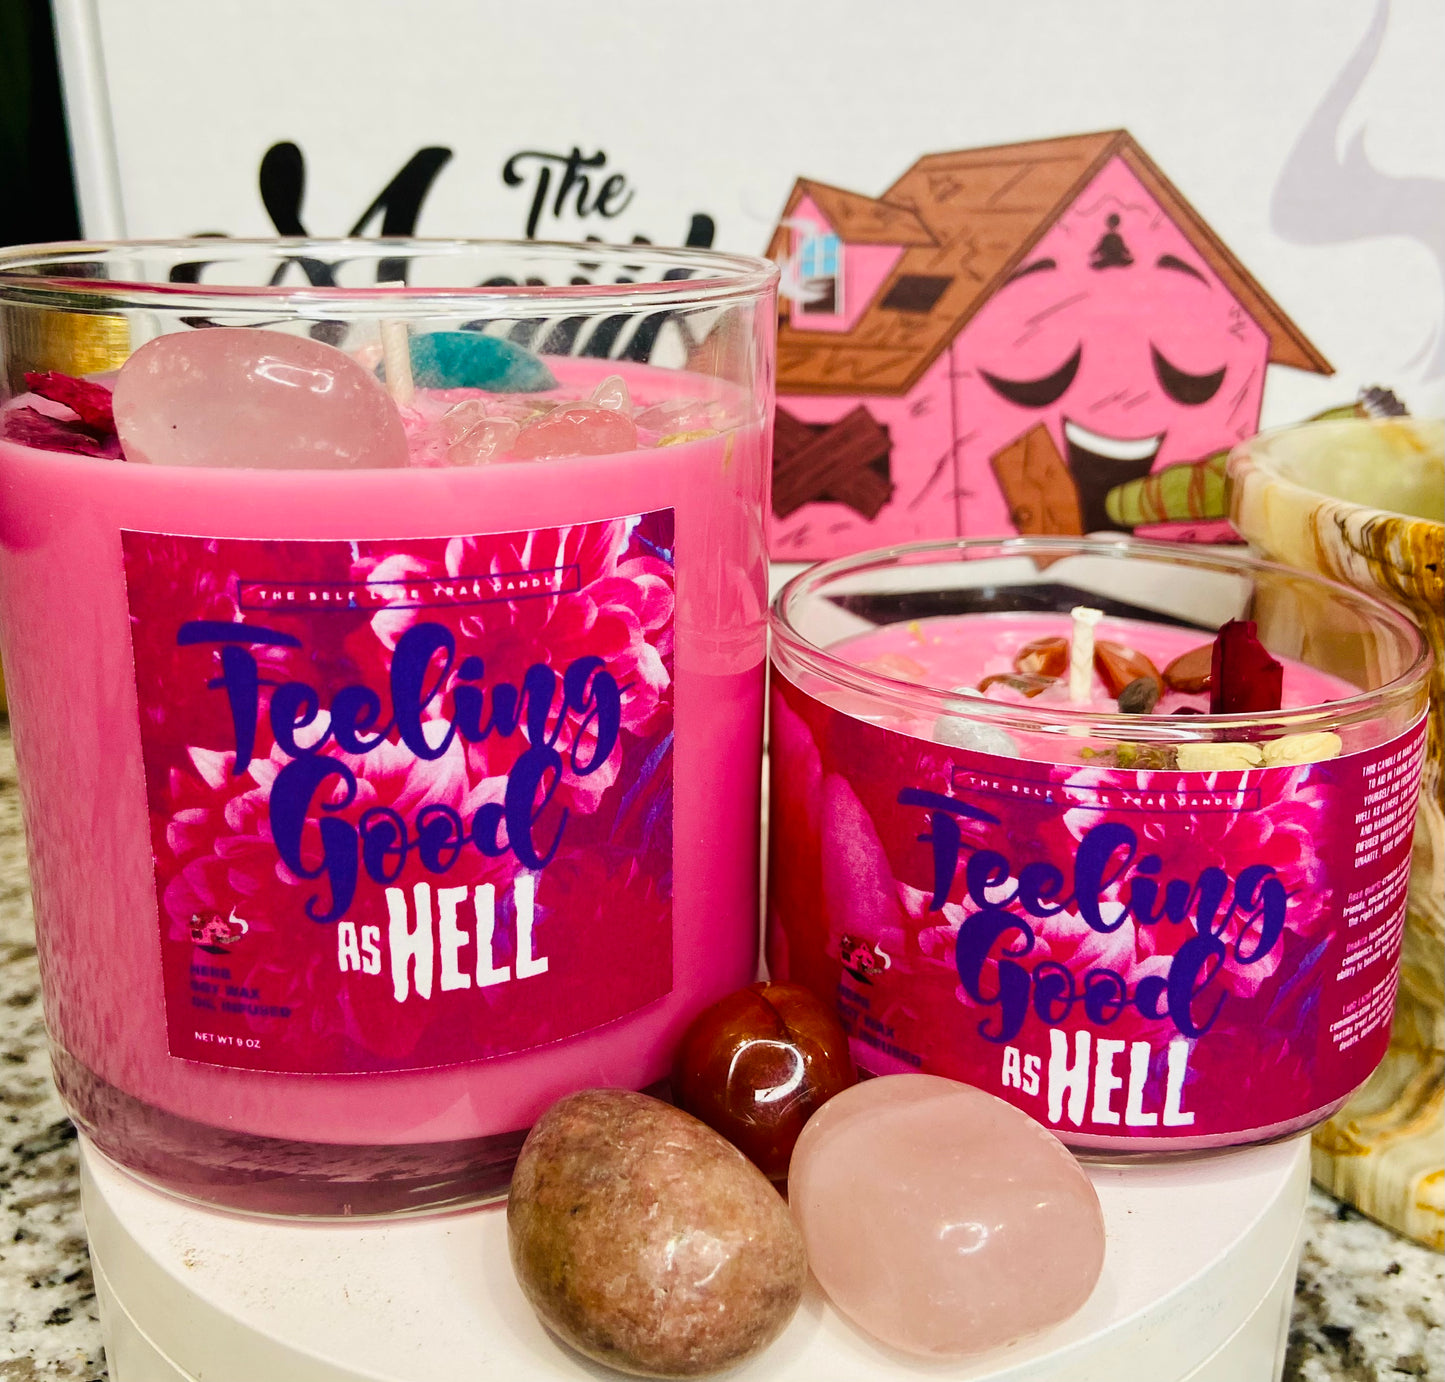 "Feeling Good as Hell" Self Love Trap Candle